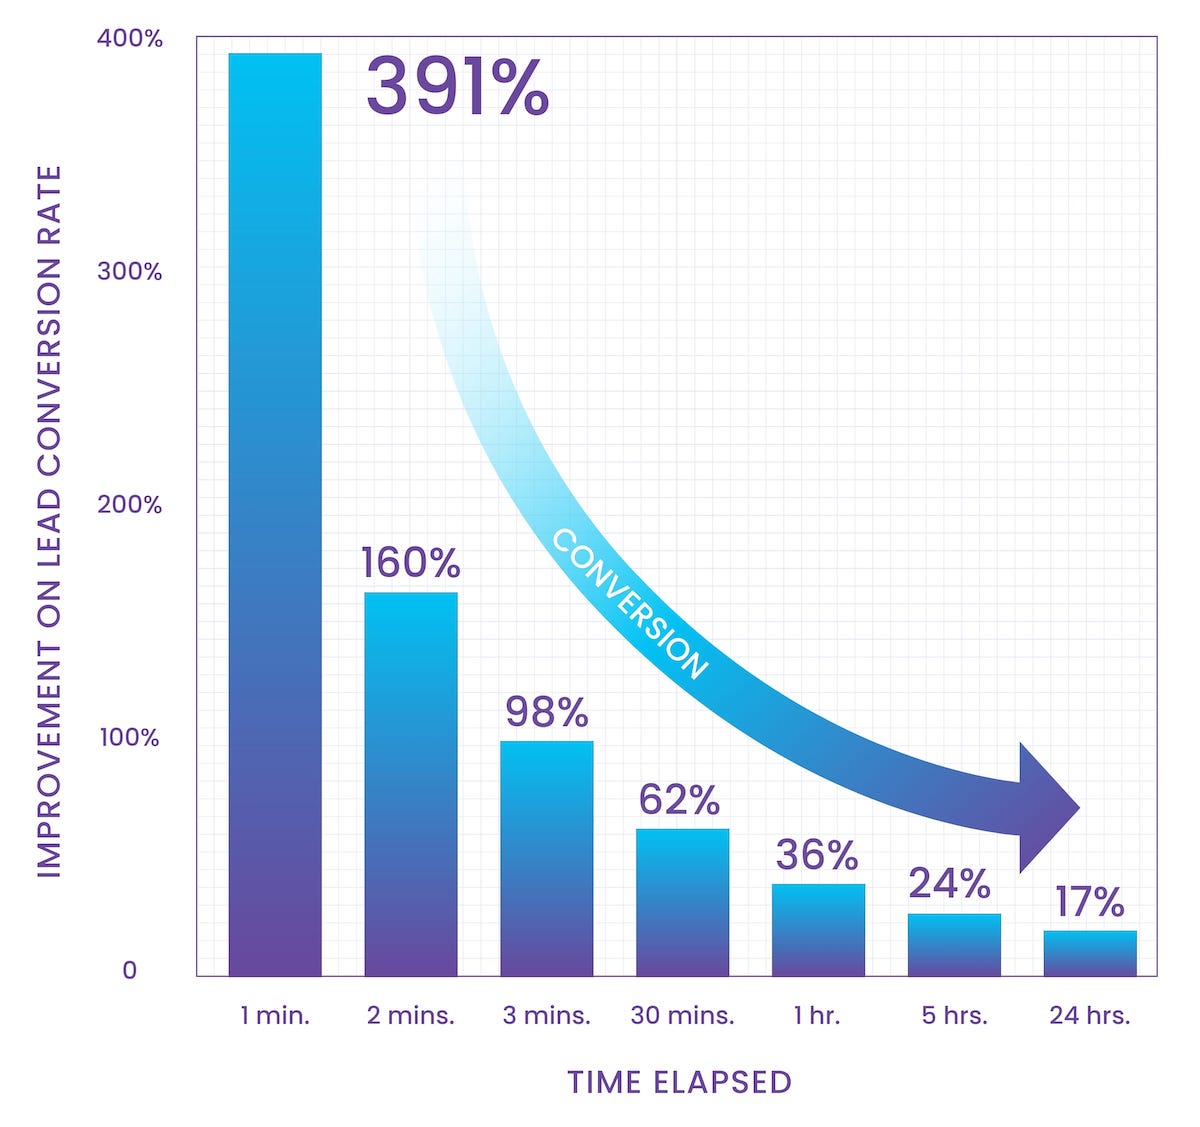 Lead Conversion Rate Based on Time to Contact